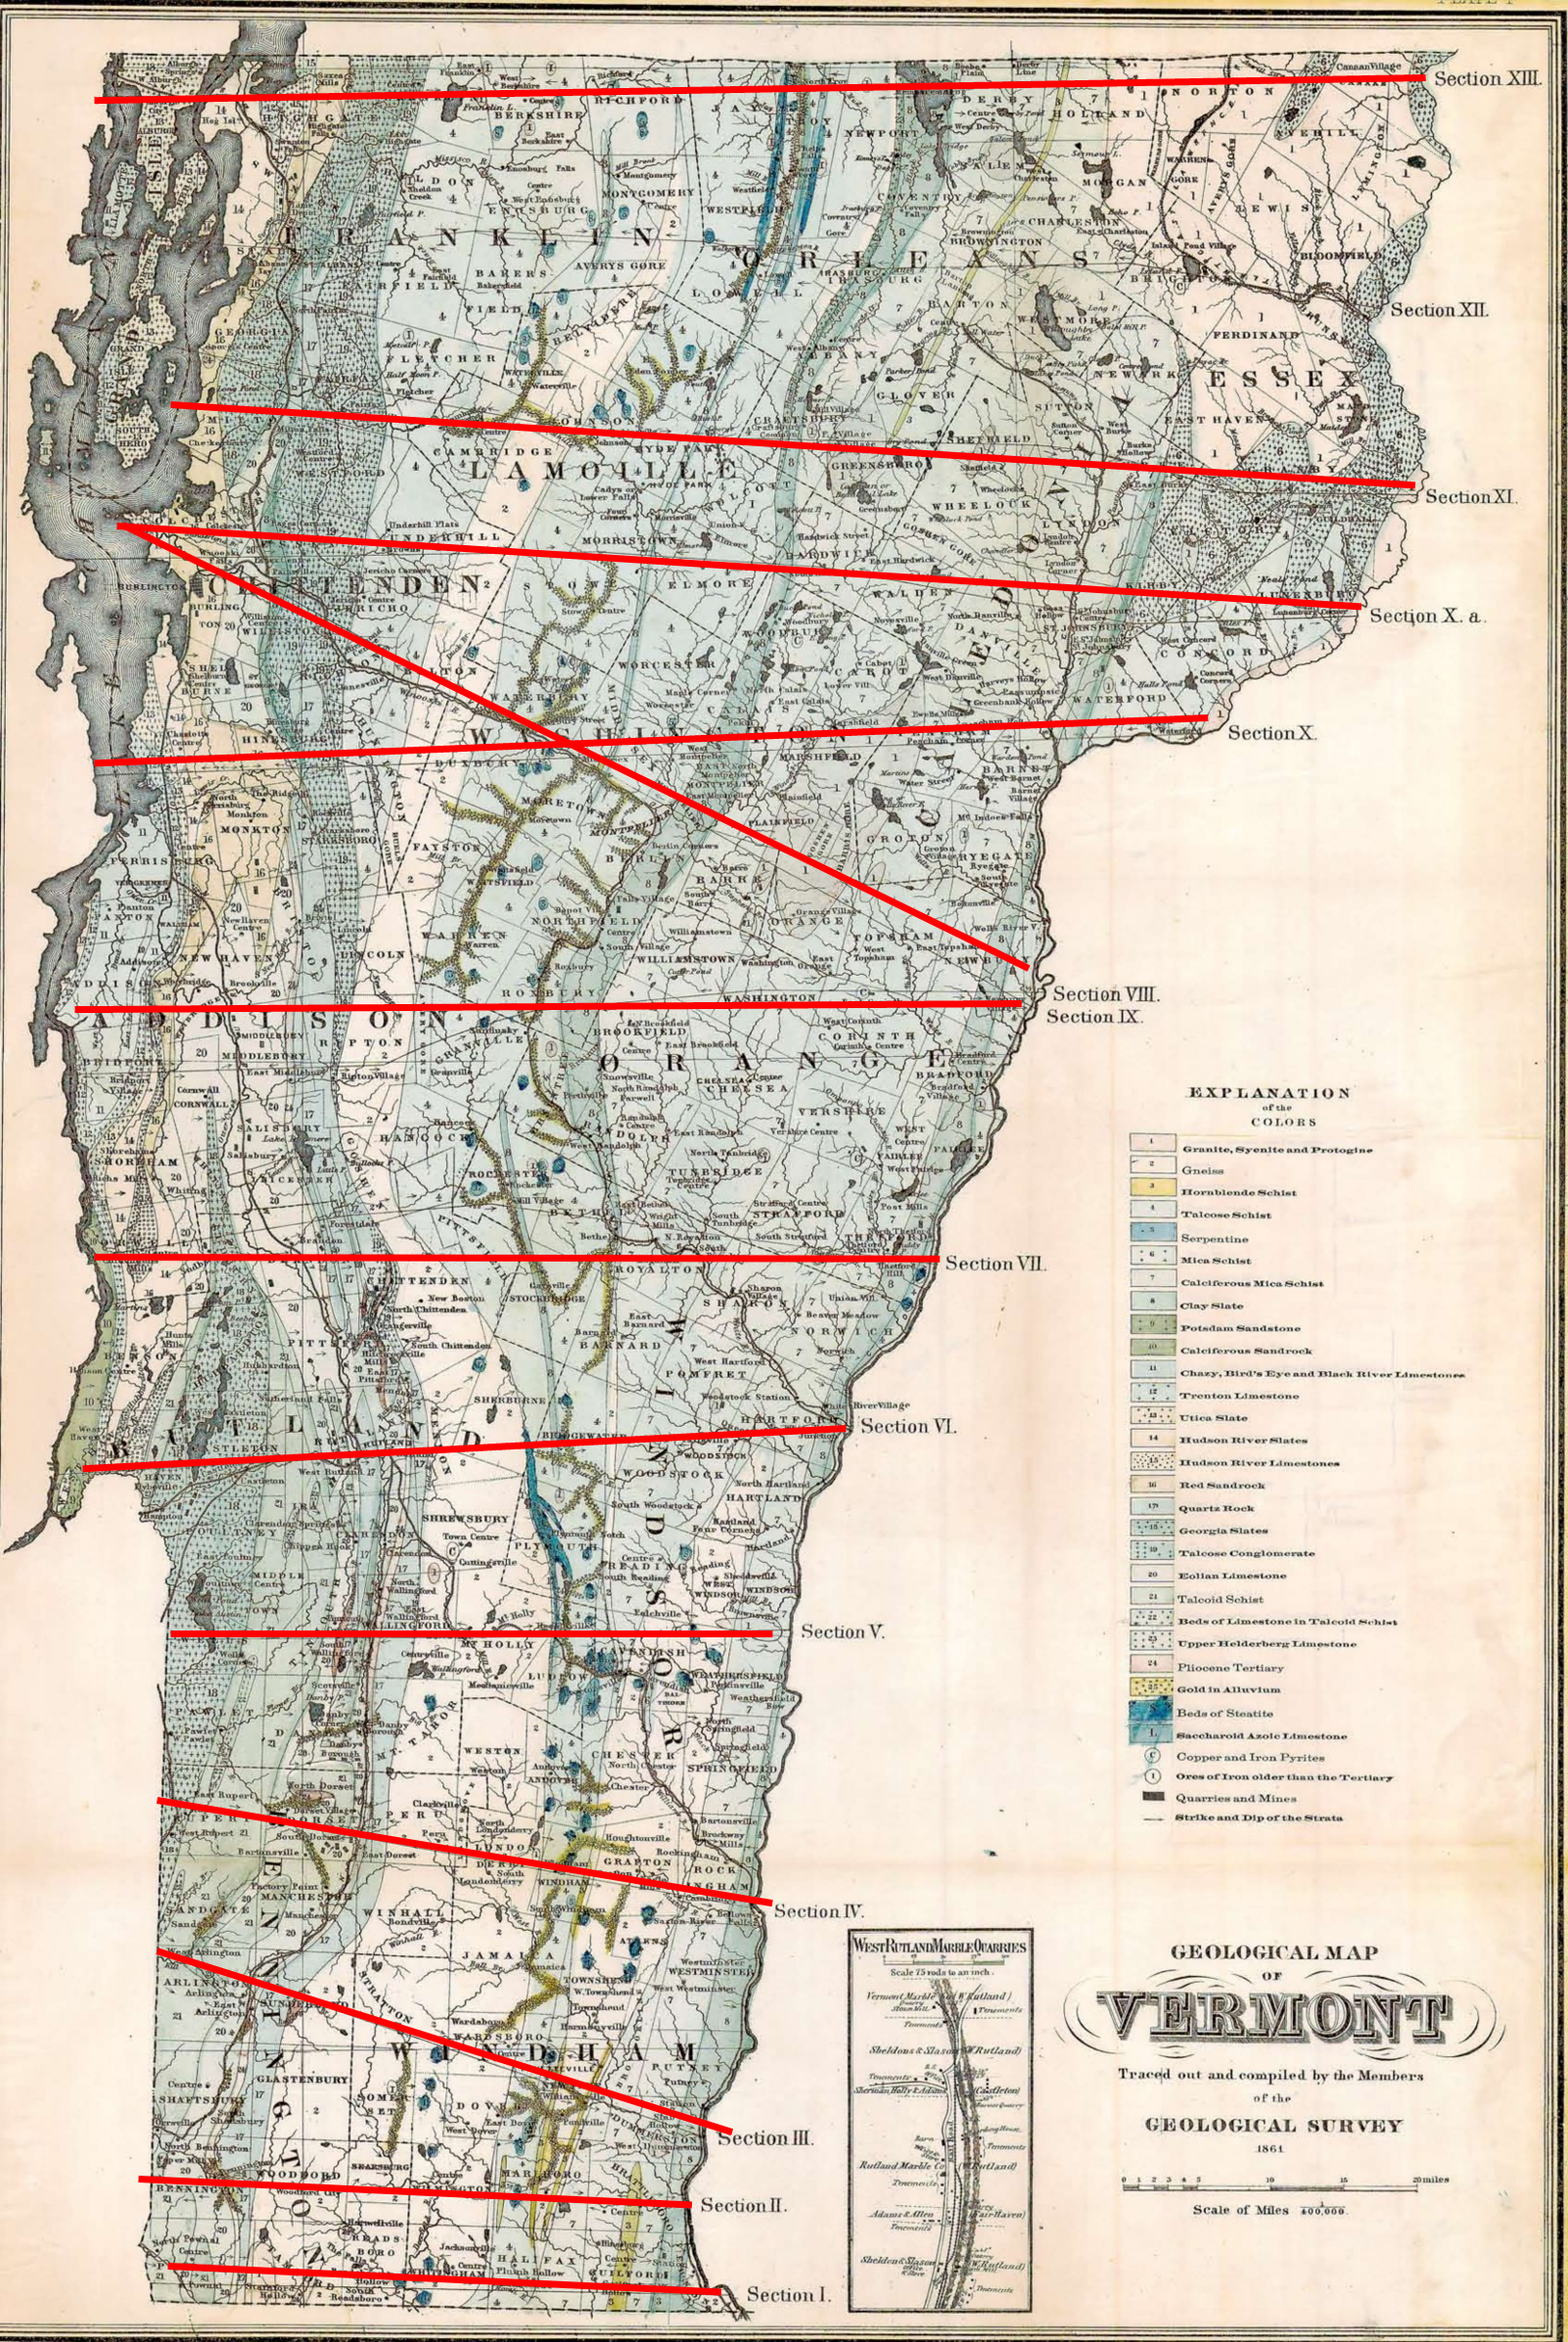 Vermont geological map